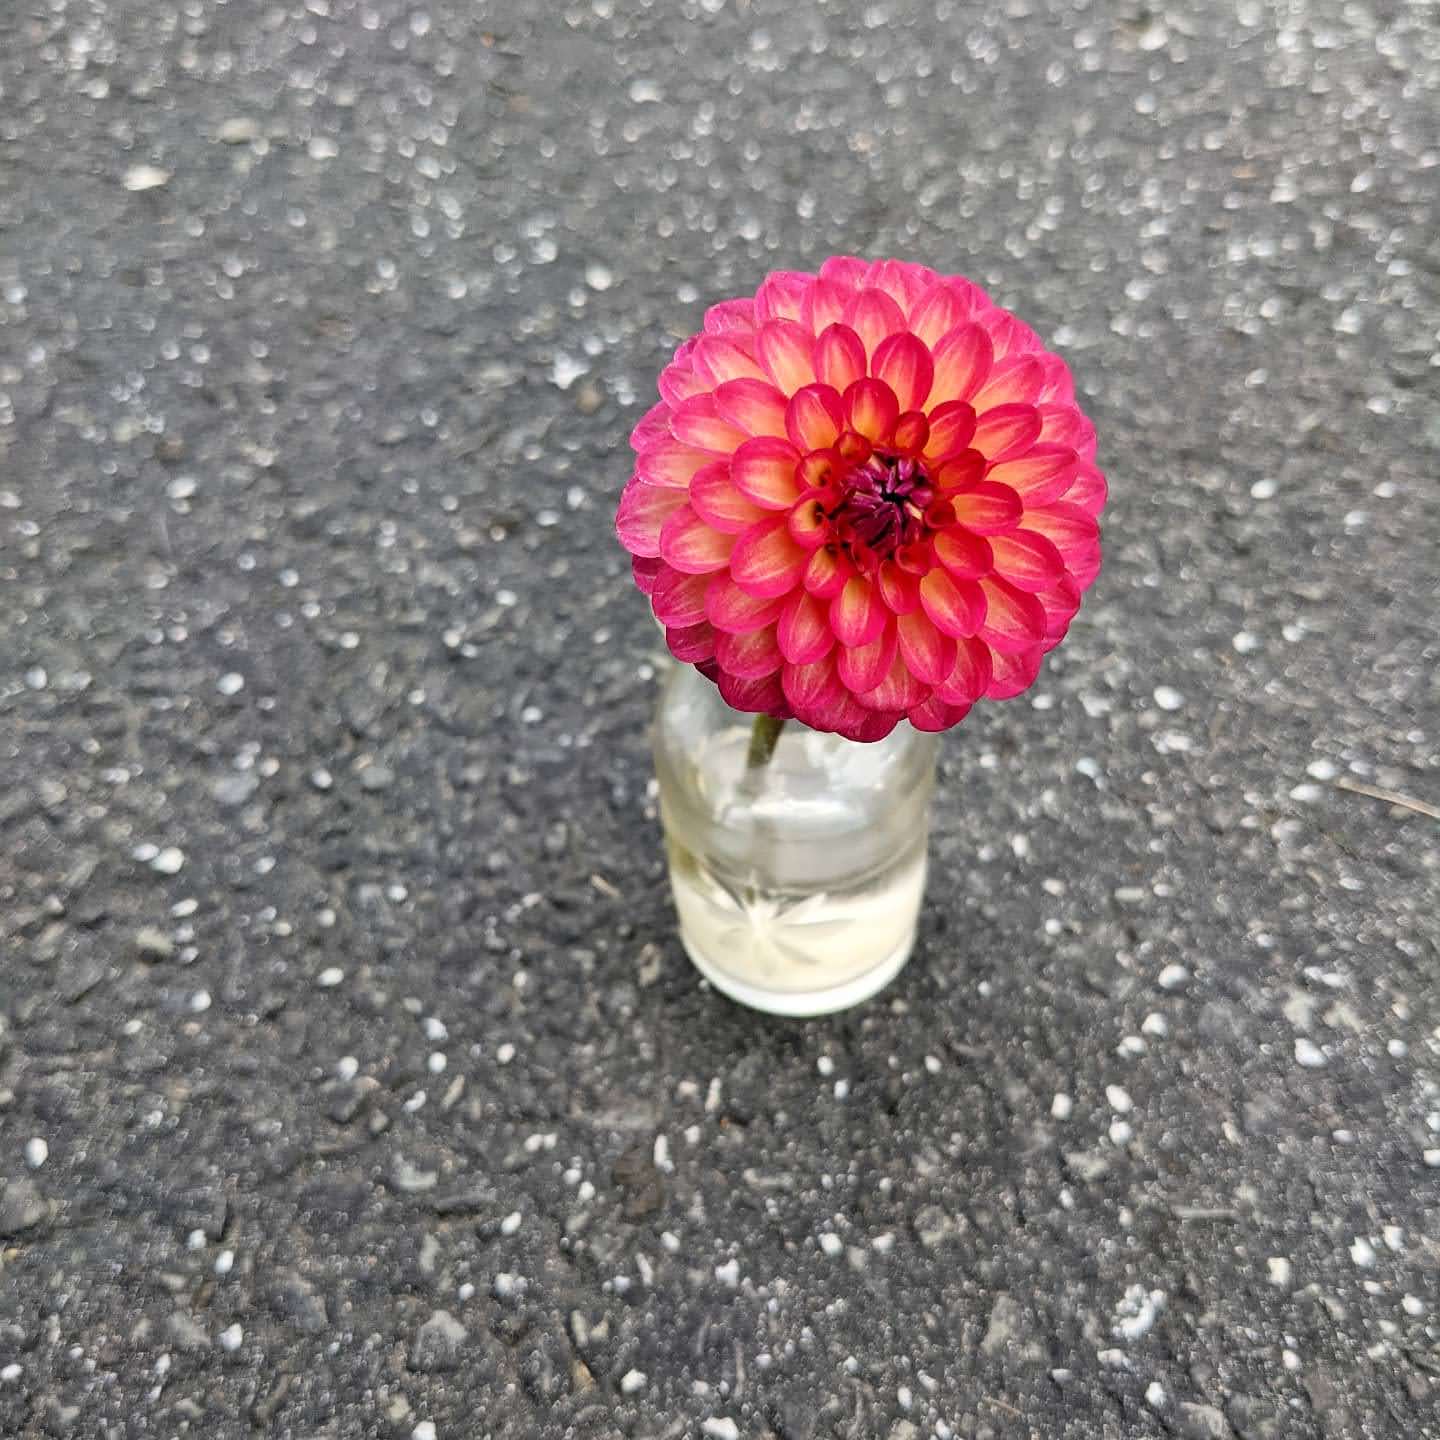 Pink Dahlia Bloom in Small Glass Vase | Taste As You Go